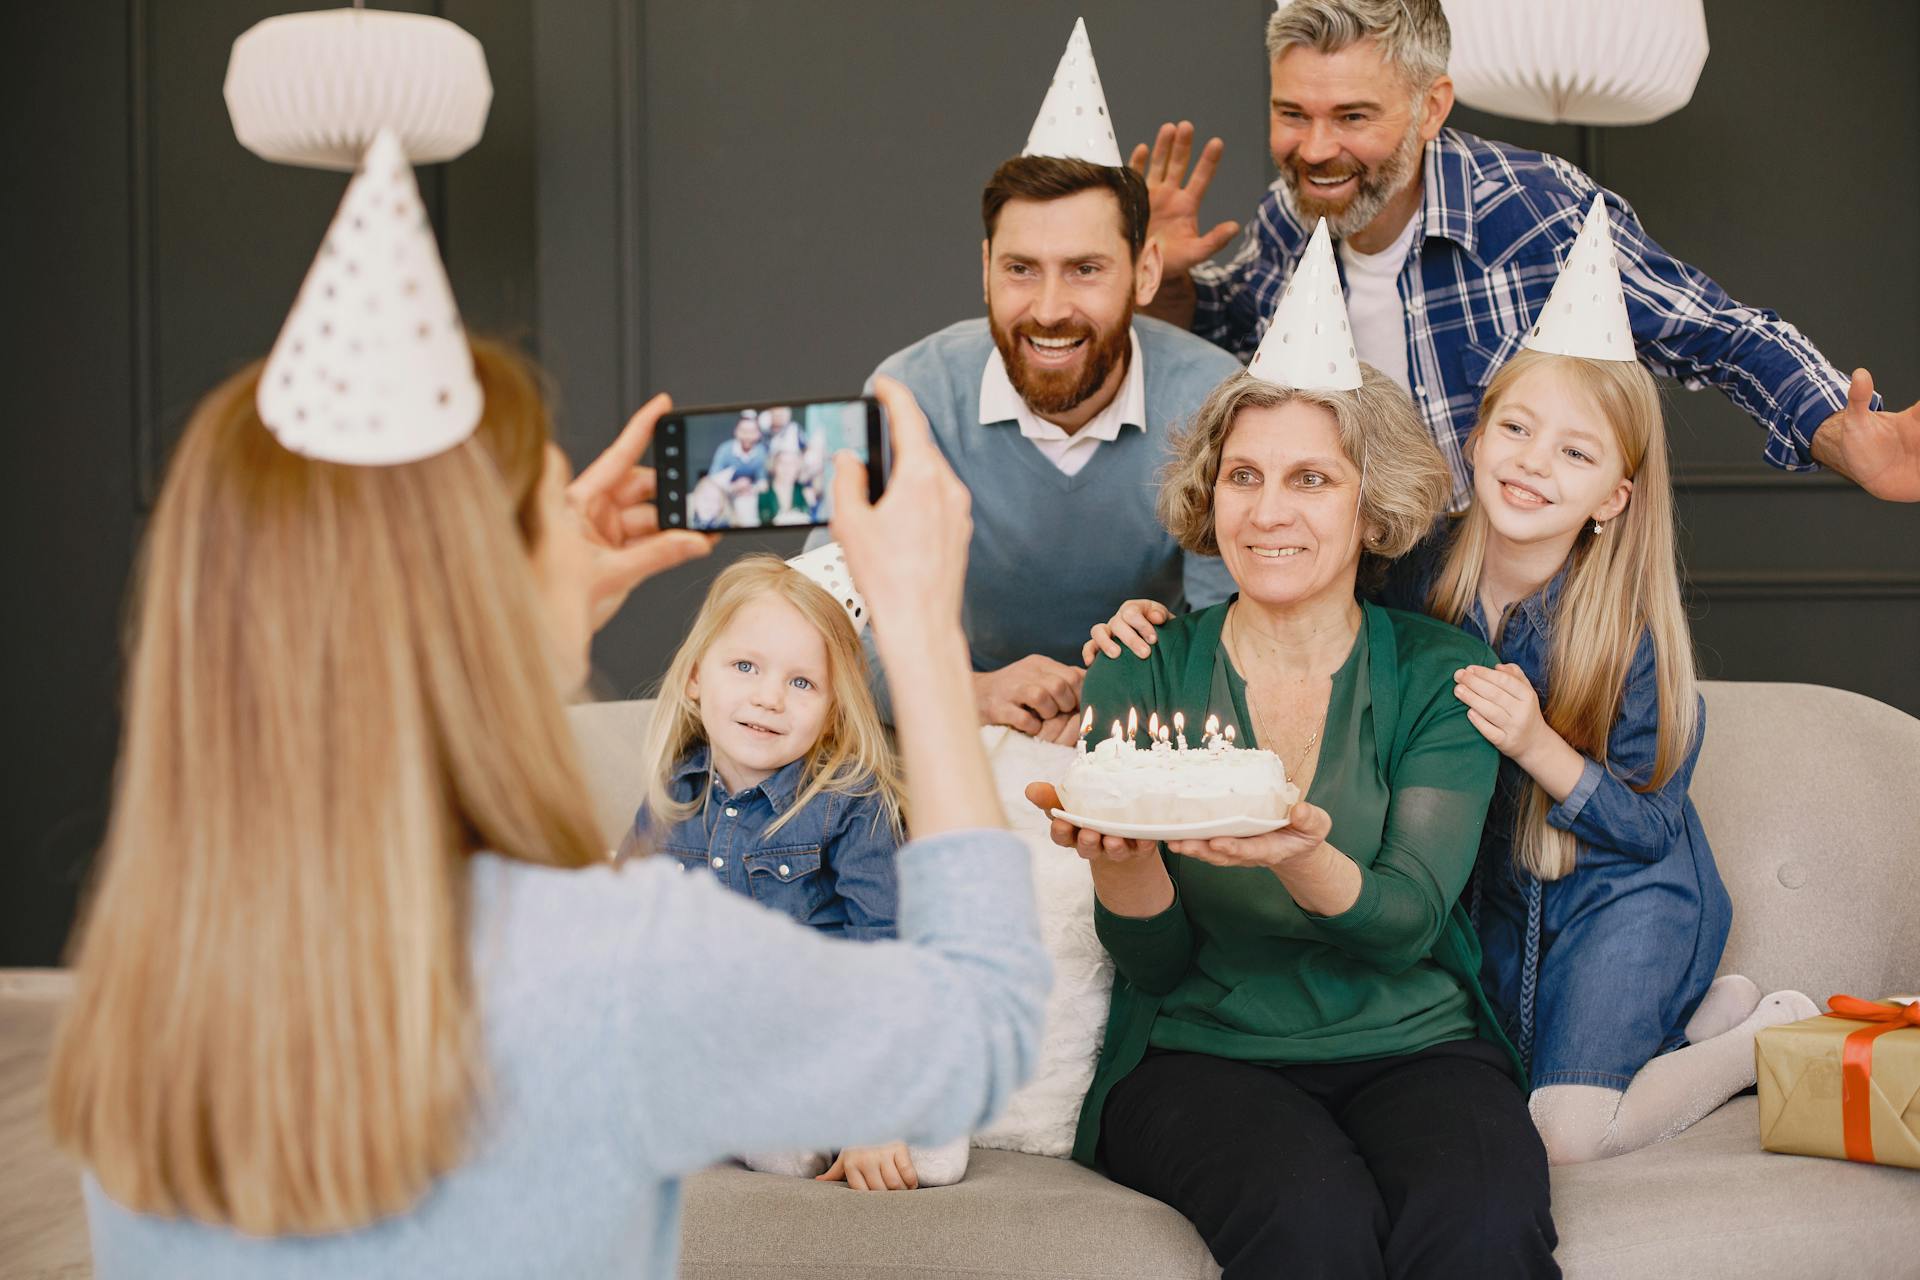 A woman clicking her family's picture at a birthday celebration | Source: Pexels